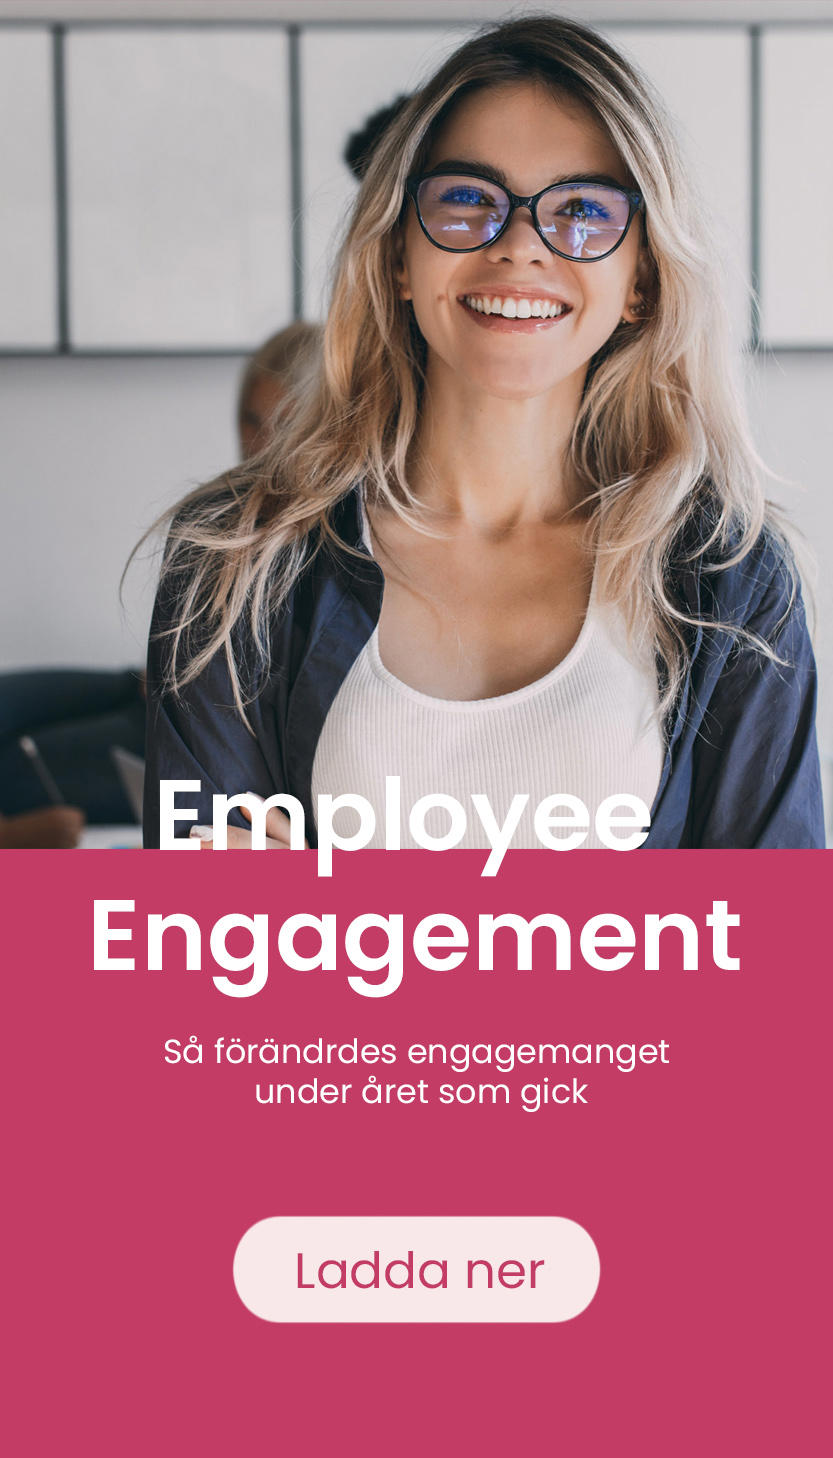 &frankly Employee Engagement Report